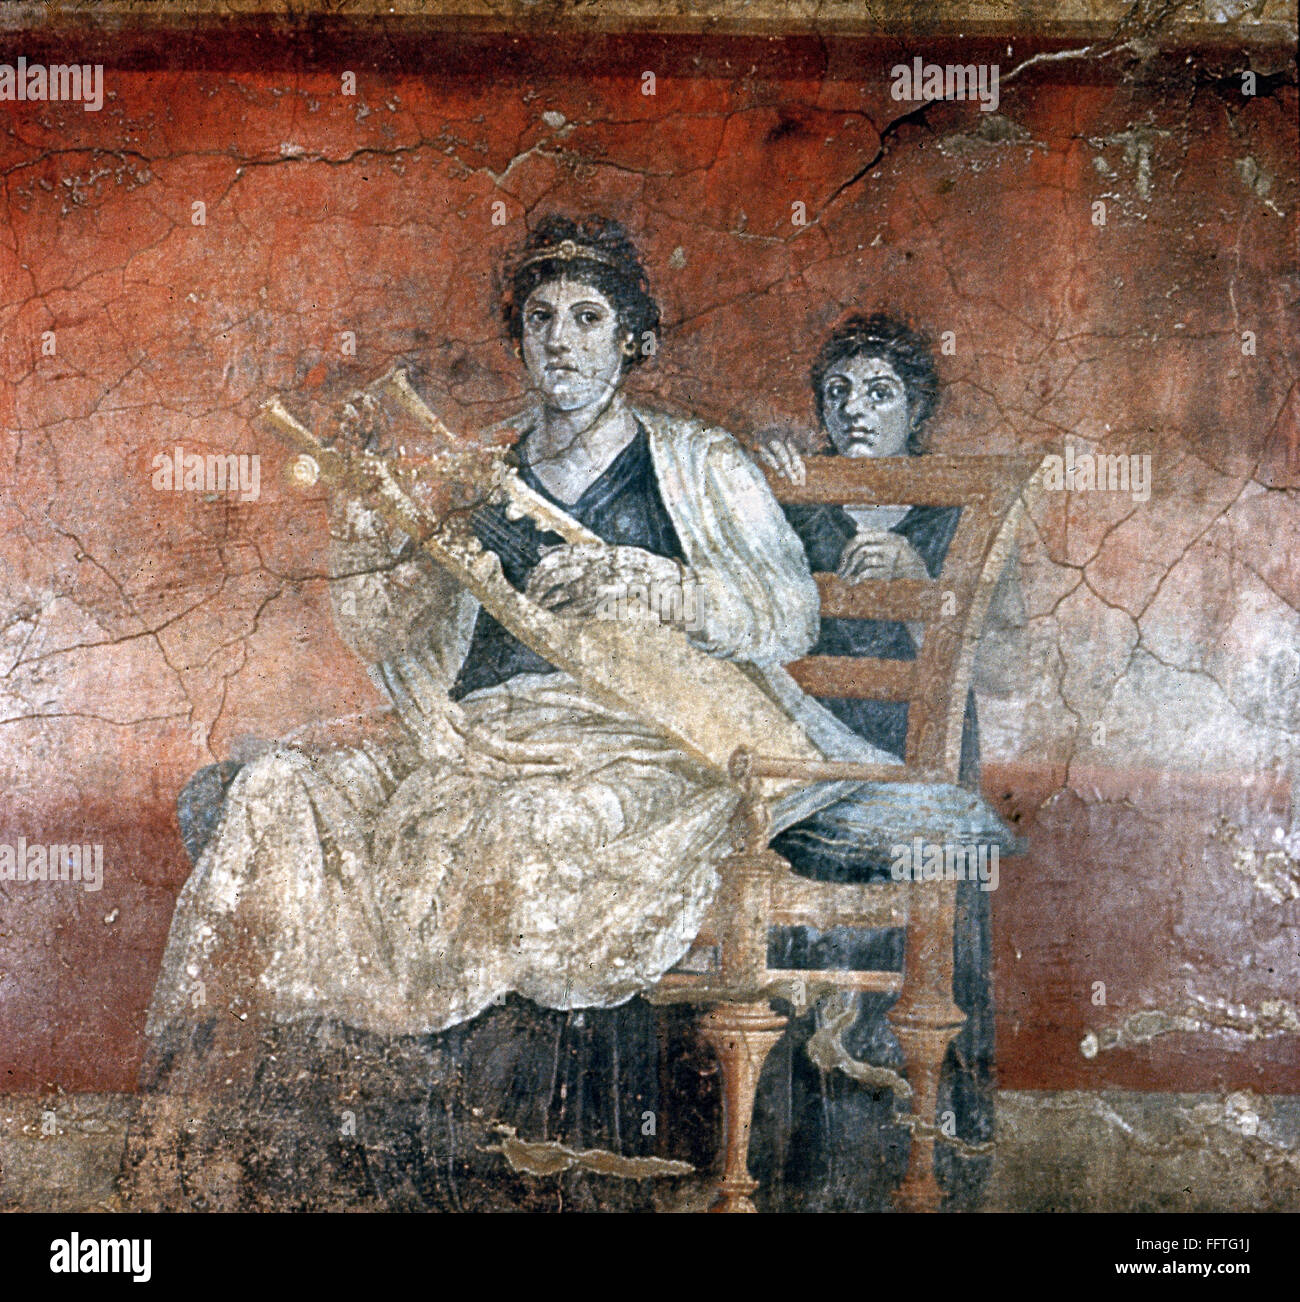 ANCIENT ROME: MURAL. /nA lady playing a cithara, a kind of lyre. Fresco painting from Boscoreale, Italy, c40-30 B.C. Stock Photo